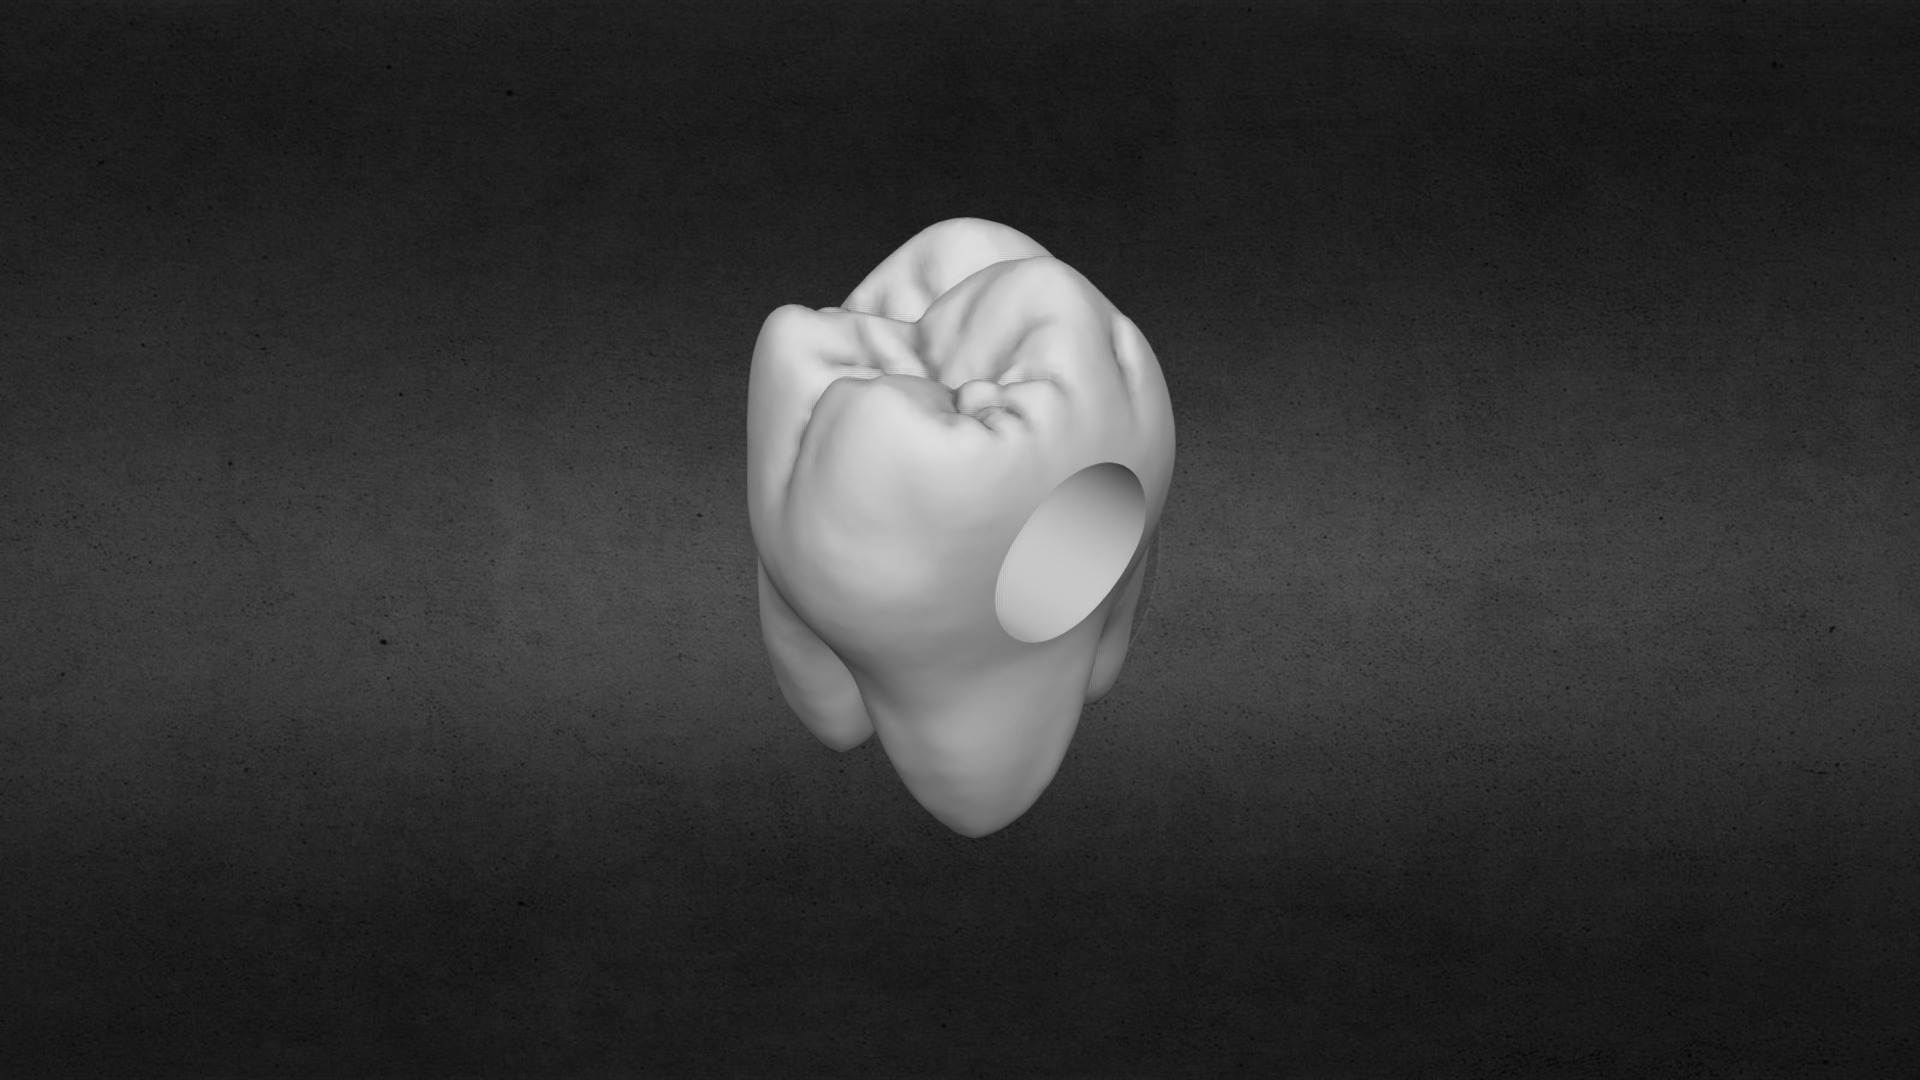 3D model Pandora Tooth Charm - This is a 3D model of the Pandora Tooth Charm. The 3D model is about a hand with a finger pointing up.